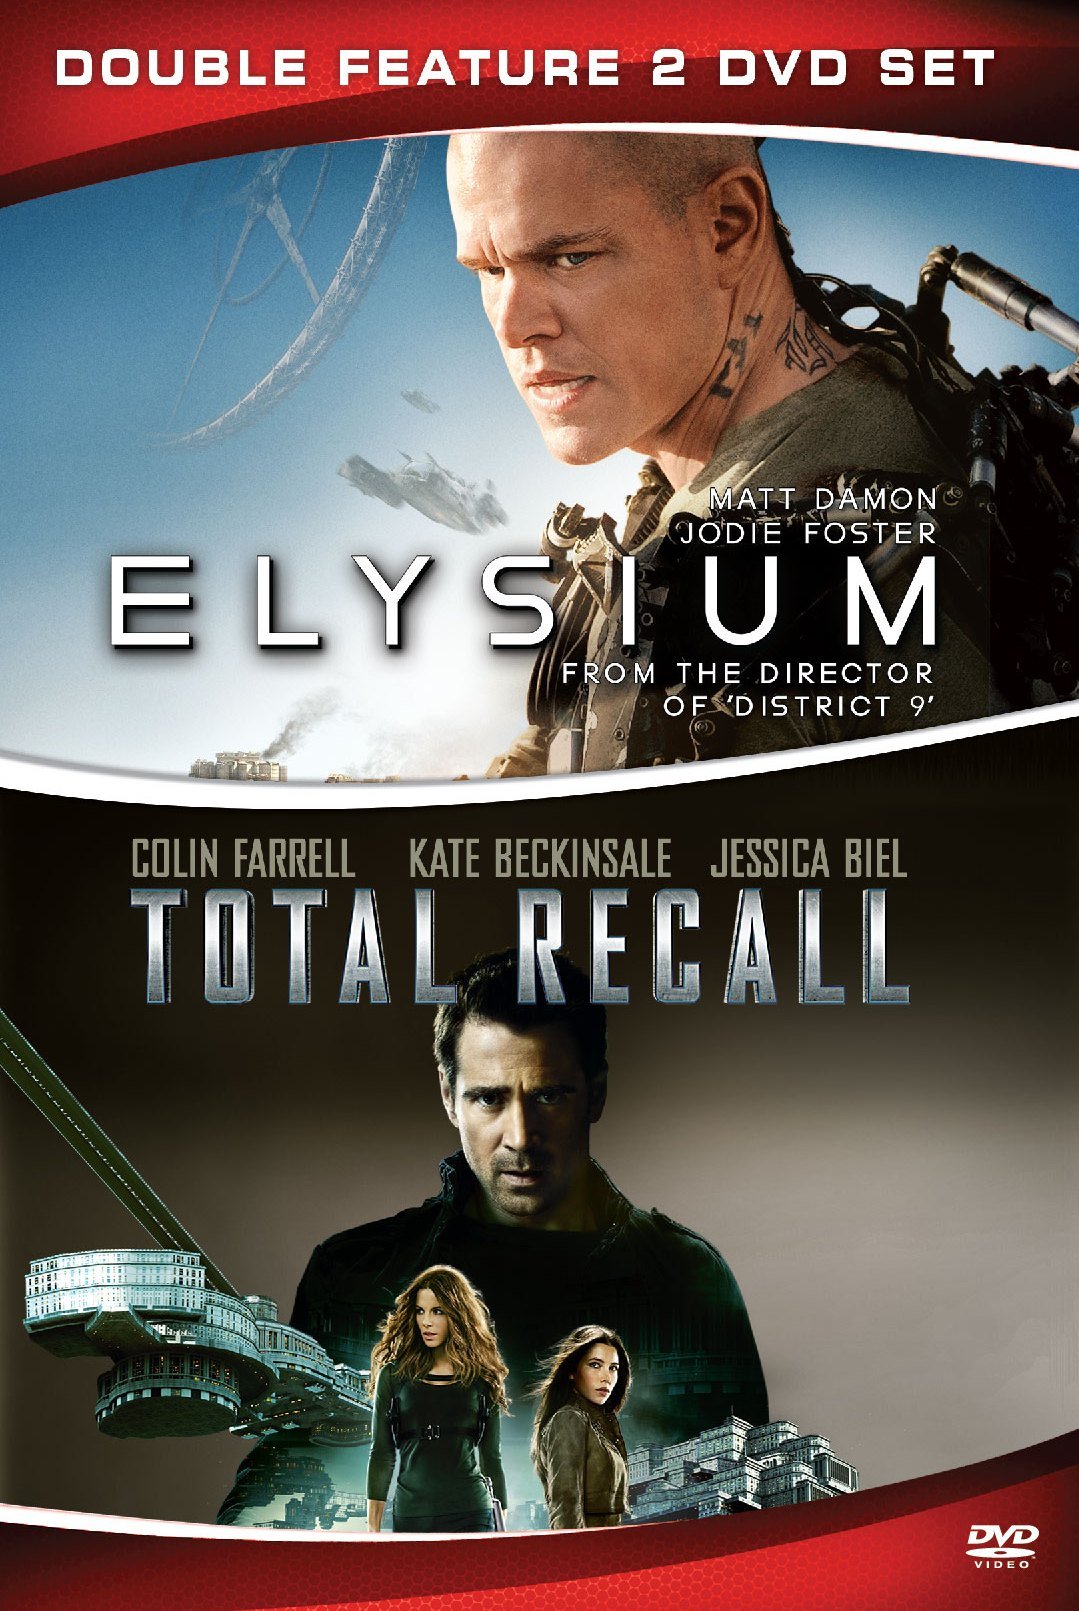 elysium-total-recall-movie-purchase-or-watch-online